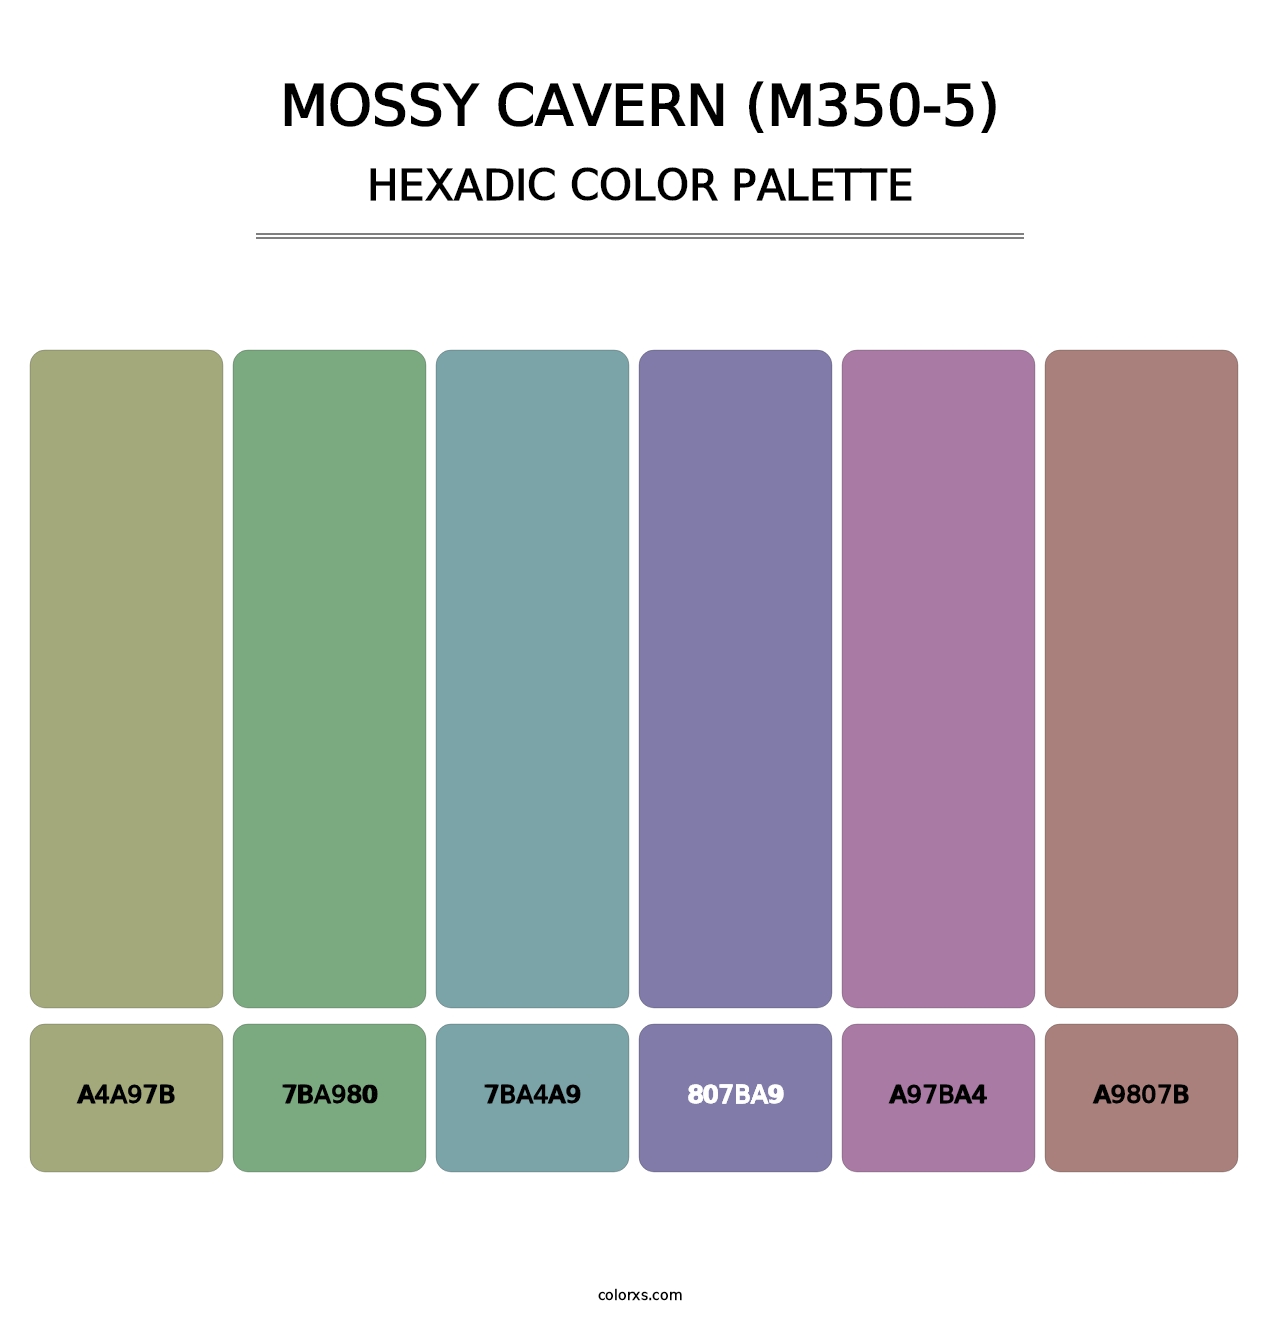 Mossy Cavern (M350-5) - Hexadic Color Palette